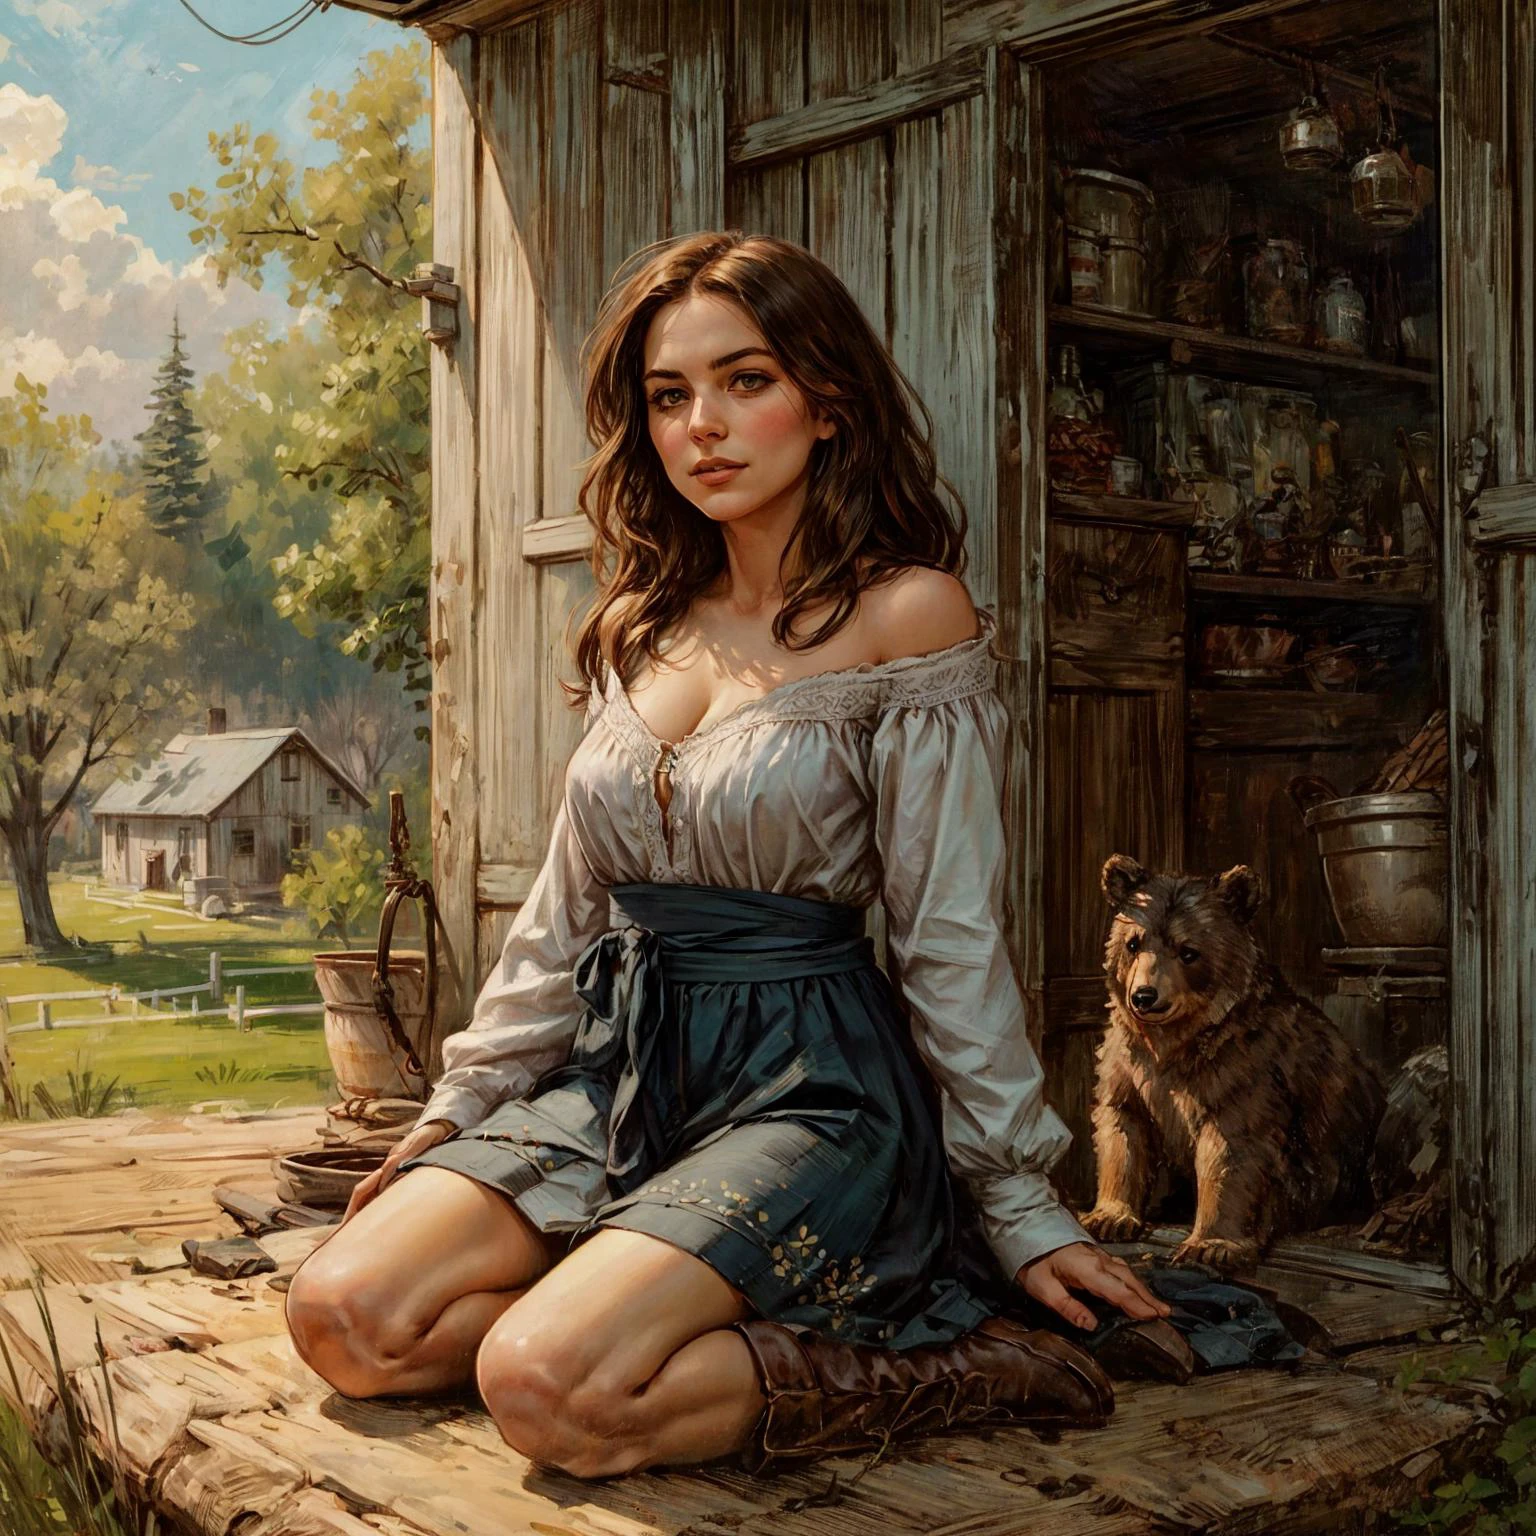 Amidst the serene backdrop of the American South, envision a resolute Southern homesteader [leaning] against. She possesses a [tall] and [slim] stature, characterized by a [youthful and beautiful figure] with [delicate curves], [narrow waist], [graceful hips], and [smooth, unblemished skin]. Her [youthful, perky breasts] and [slim, toned physique] accentuate her [elegant form] and [sleek legs].
Her face with delicate downturned lips and gentle warm smile, face framed by [hair], radiates a captivating beauty. Her detailed hi-res [brown] upturned eyes with warm gaze and [black eyeliner]. Her [rich chestnut hair] falls in [tousled waves], adding to her youthful charm.
She wears a simple yet sturdy summer airy translucent [homespun dress] clinging tightly to her body with cleavage and naked shoulders, faded from countless hours of labor, yet it cannot conceal her [youthful allure] and dusty boots bear witness to her tireless toil on the land.
Around her, the homestead tells its own story, with a [weathered farmhouse] that has sheltered generations and [rolling fields] that have provided sustenance for her family. The air is filled with the scent of [sun-baked earth], and the songs of birds in the trees remind her of the peaceful world outside.
In this idyllic era, she embodies the strength and determination of those who nurtured the land, a testament to the enduring spirit of the South.
This is a glimpse into the life of a Southern homesteader during a time of peace in the American South, where the bonds of family and the land run deep.  